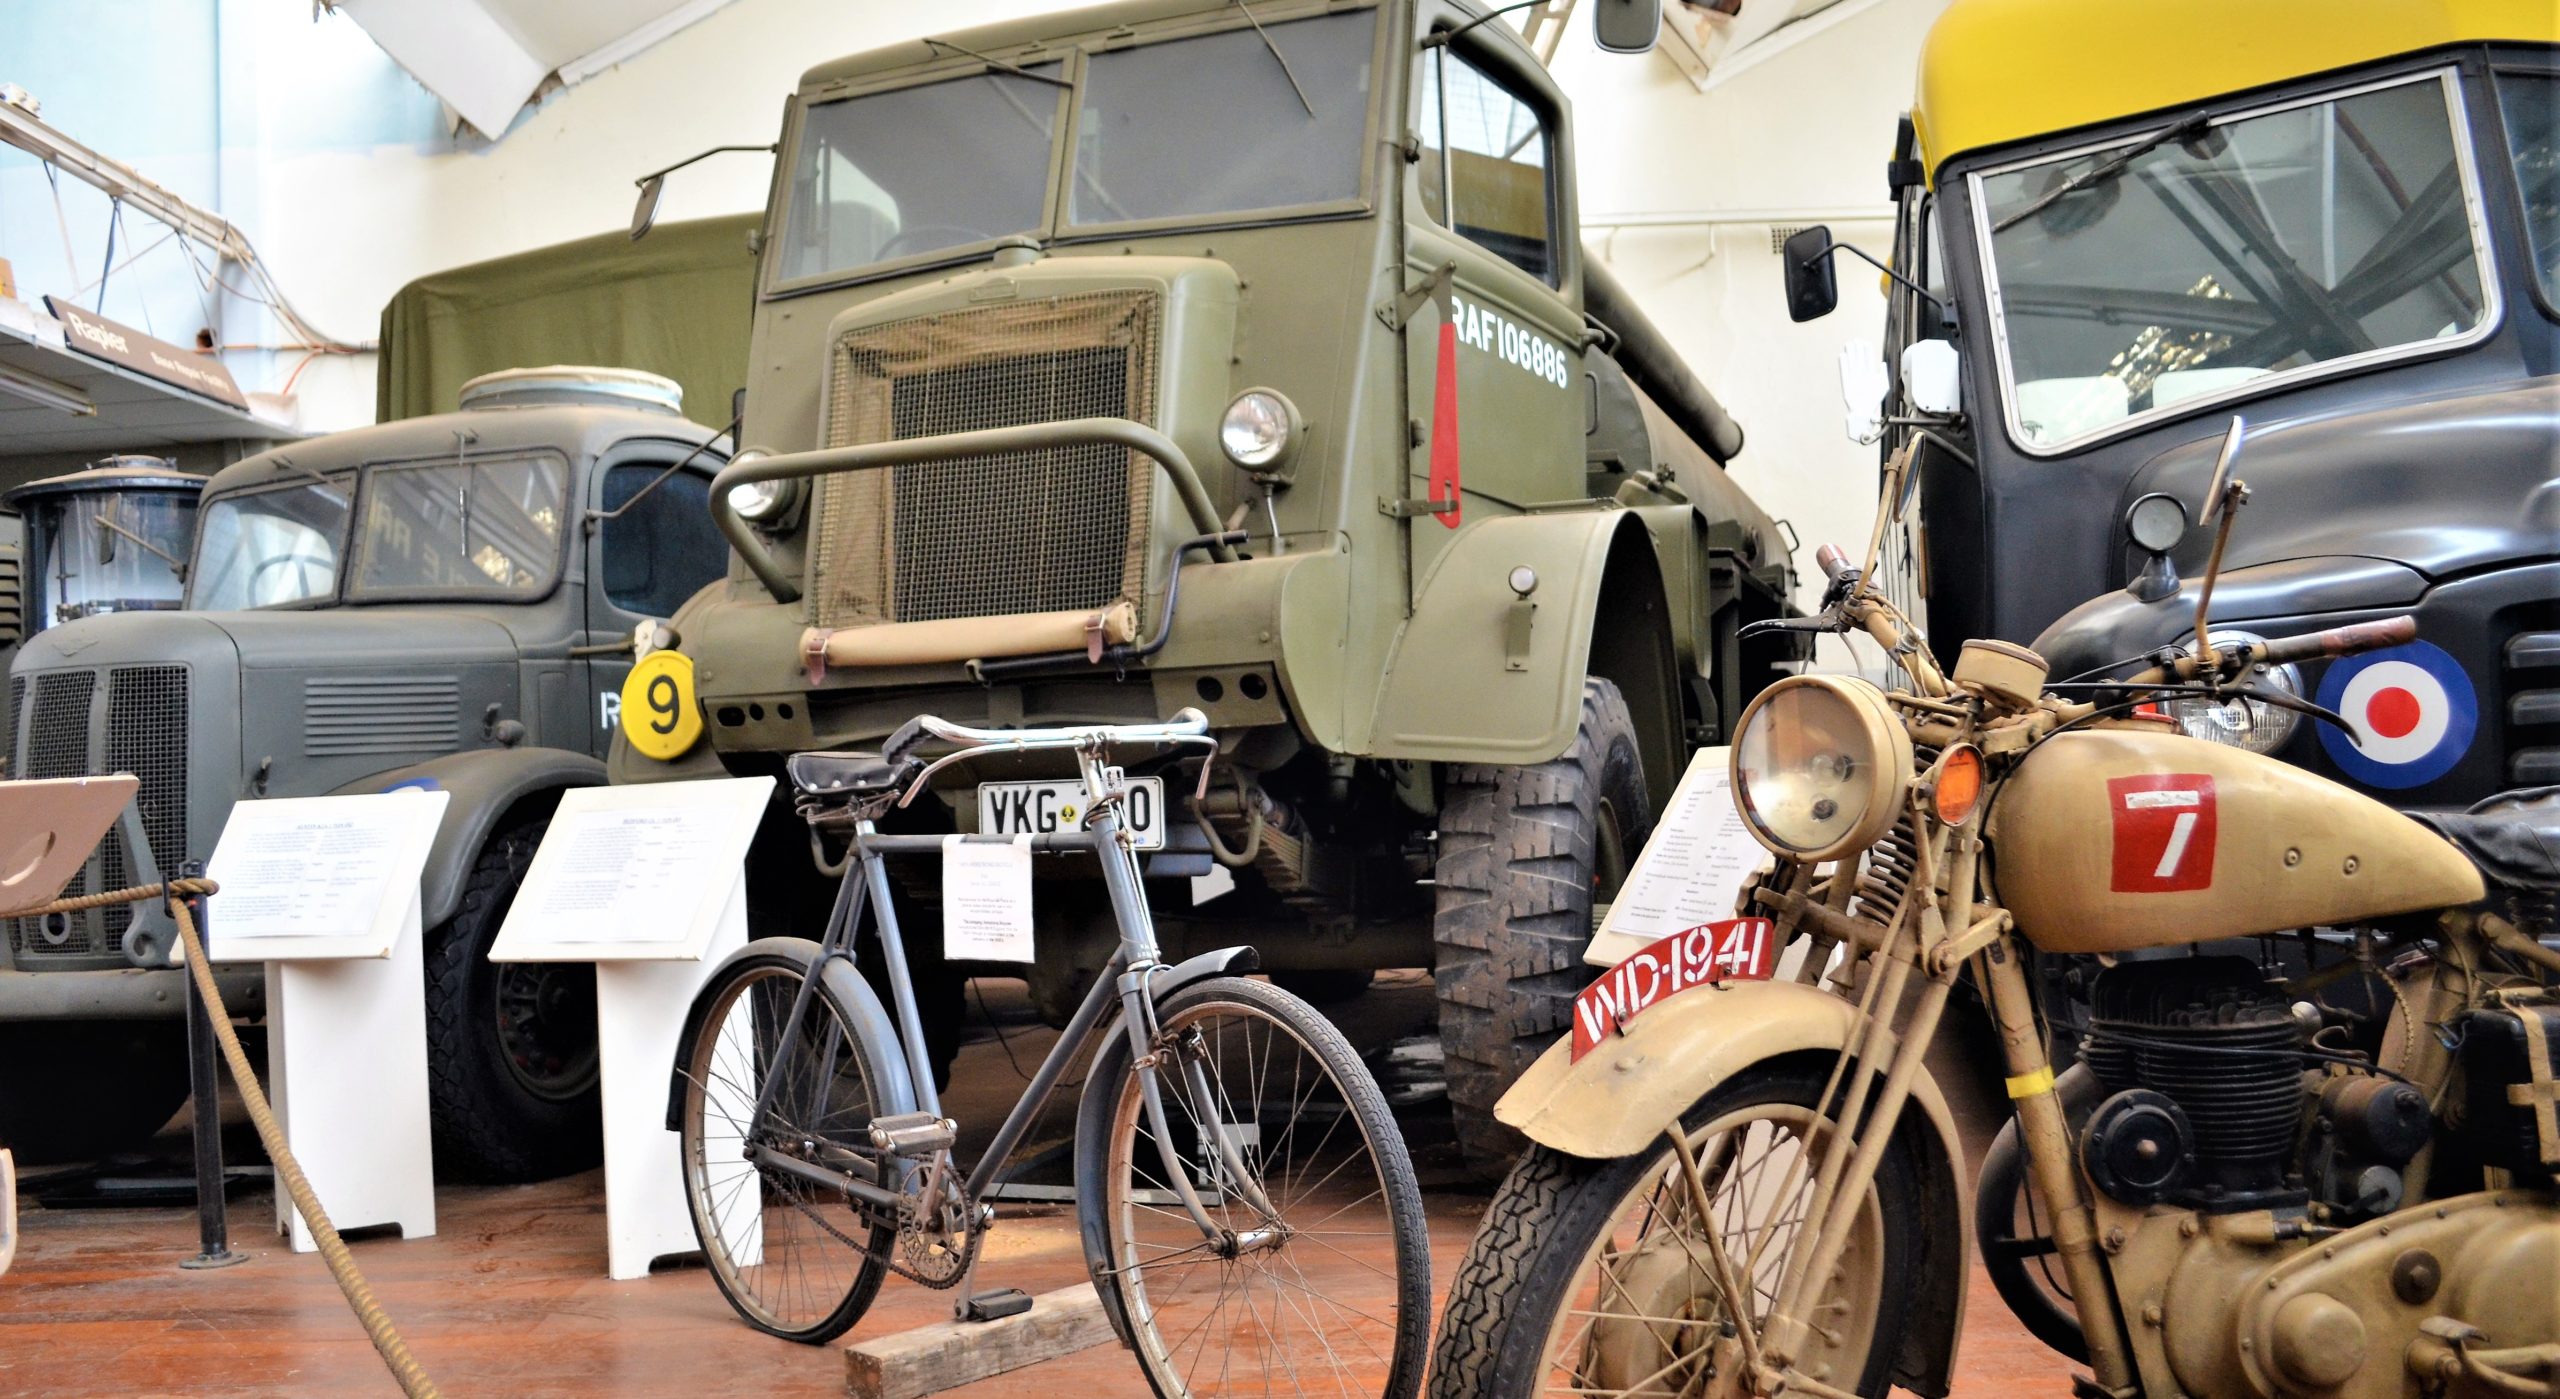 The museum has a diverse collection of military vehicles